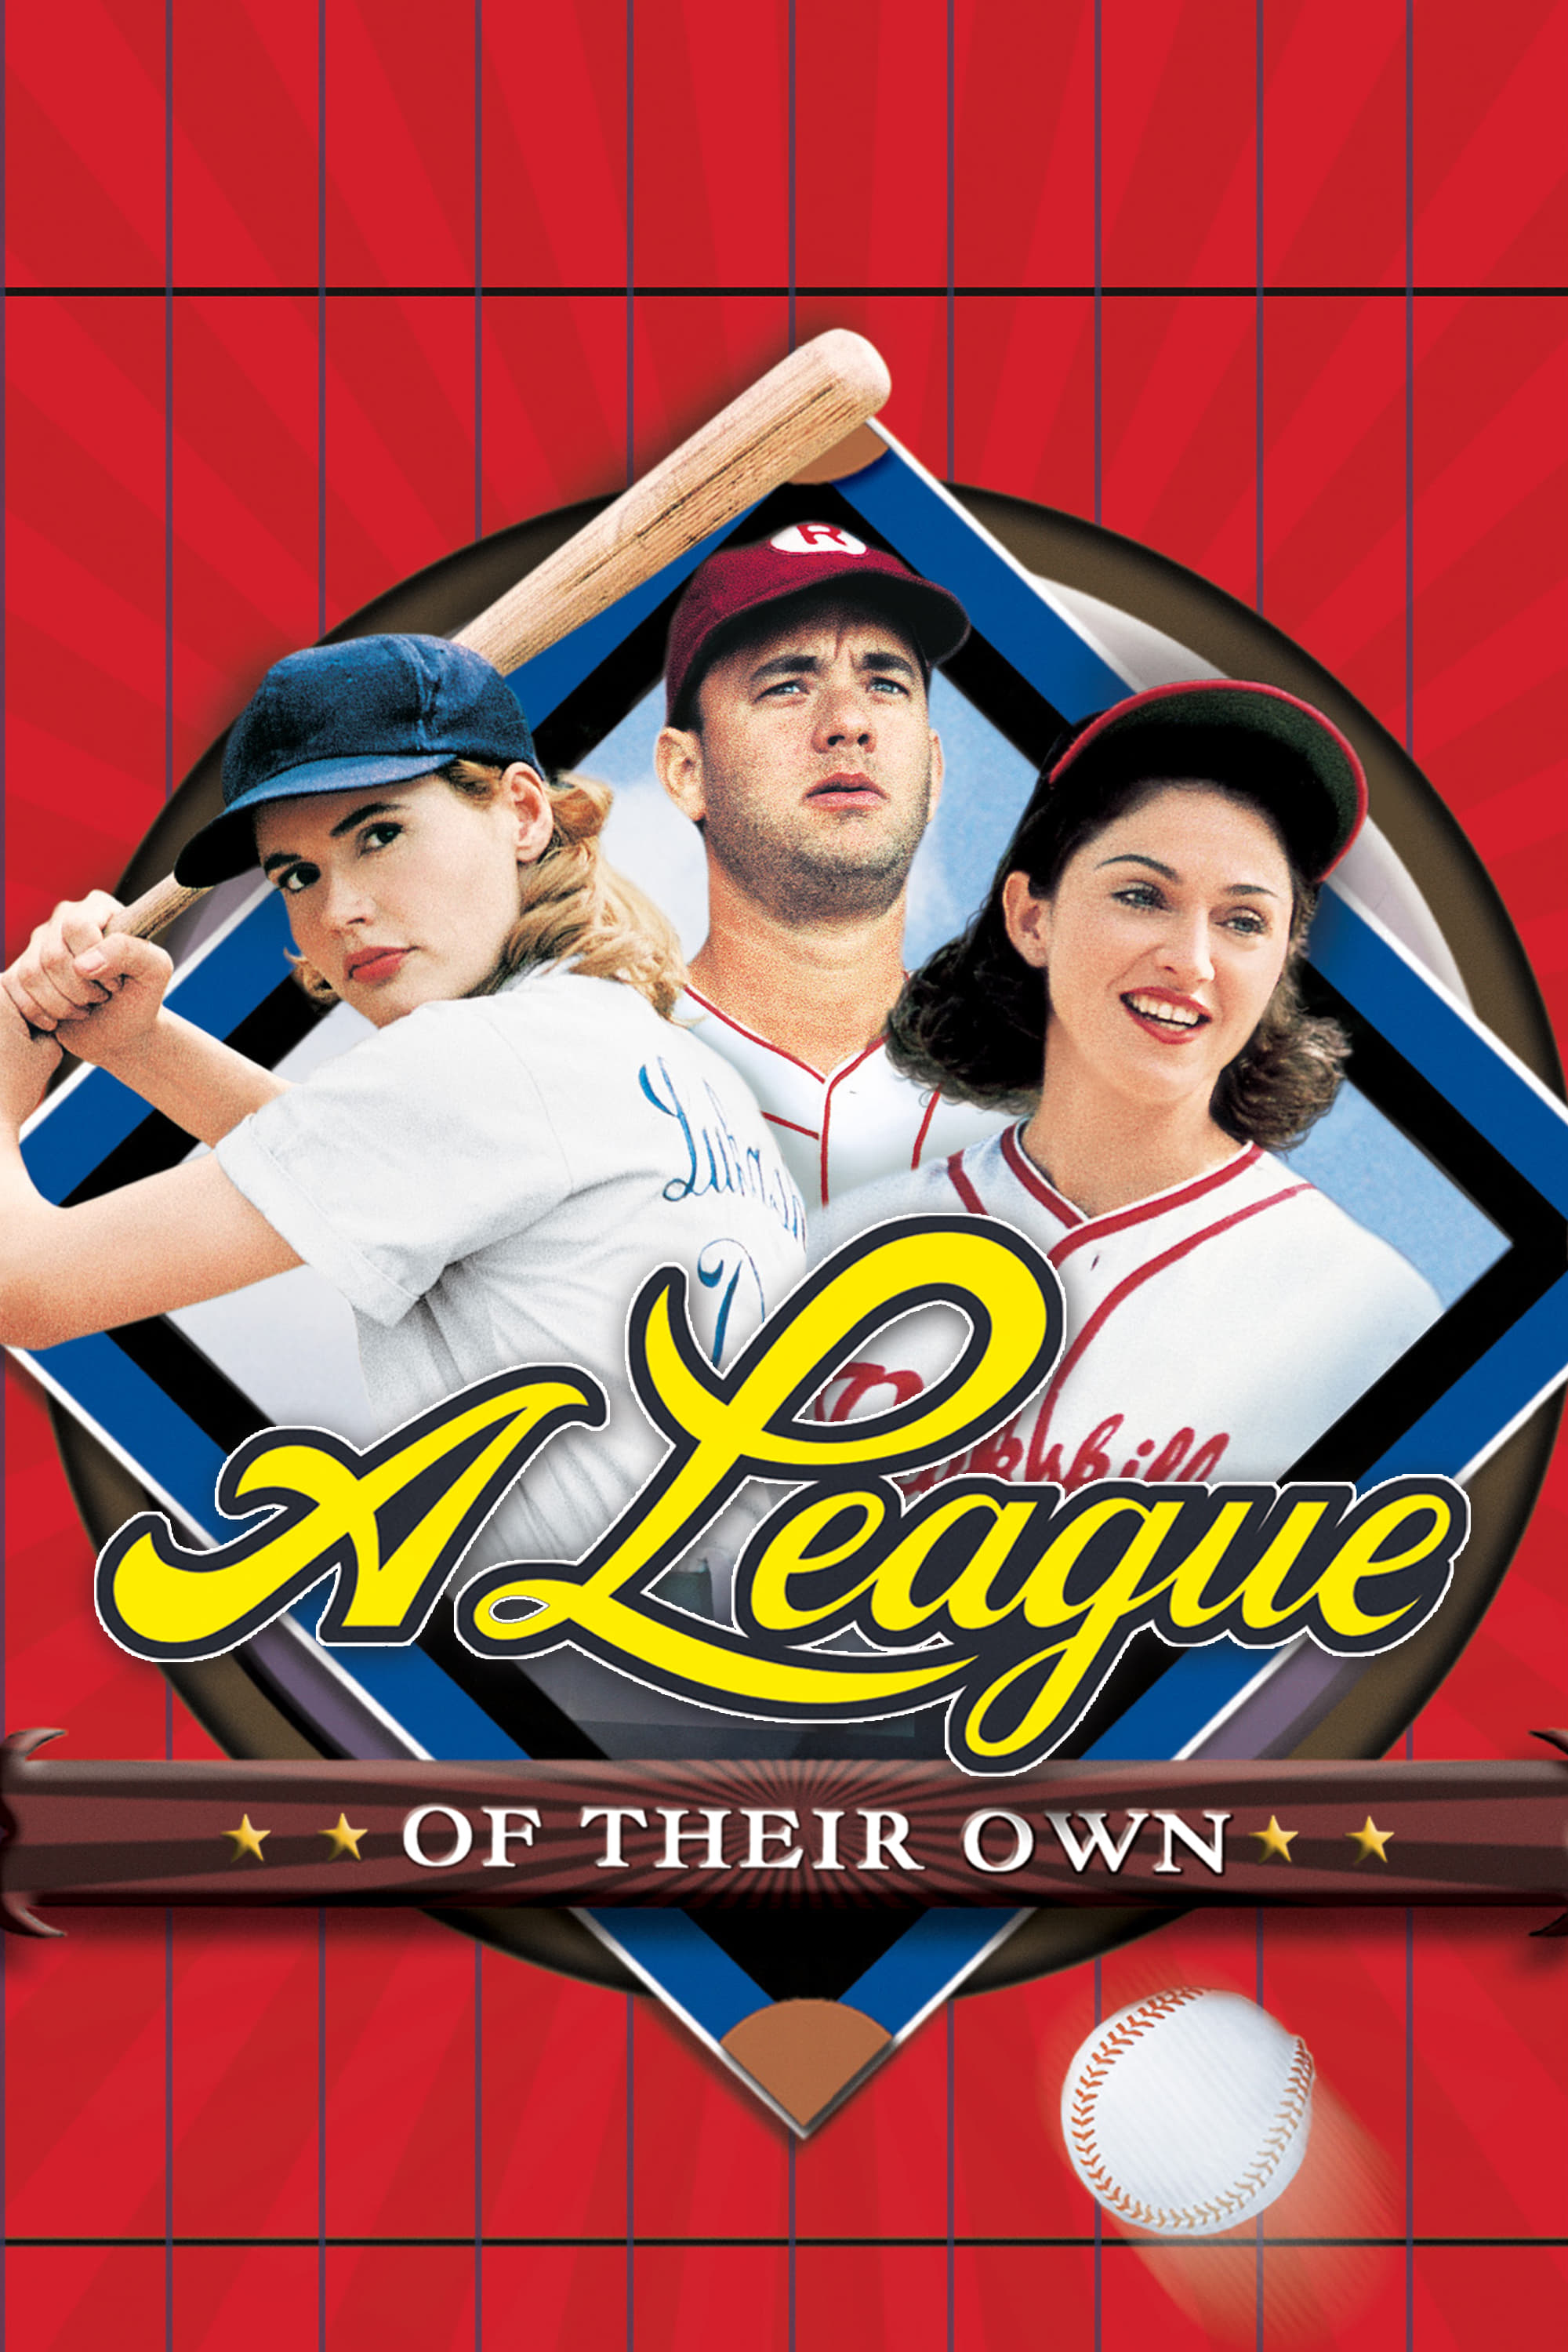 Nonton A League of Their Own Subtitle Indonesia | Movie Streaming Film01